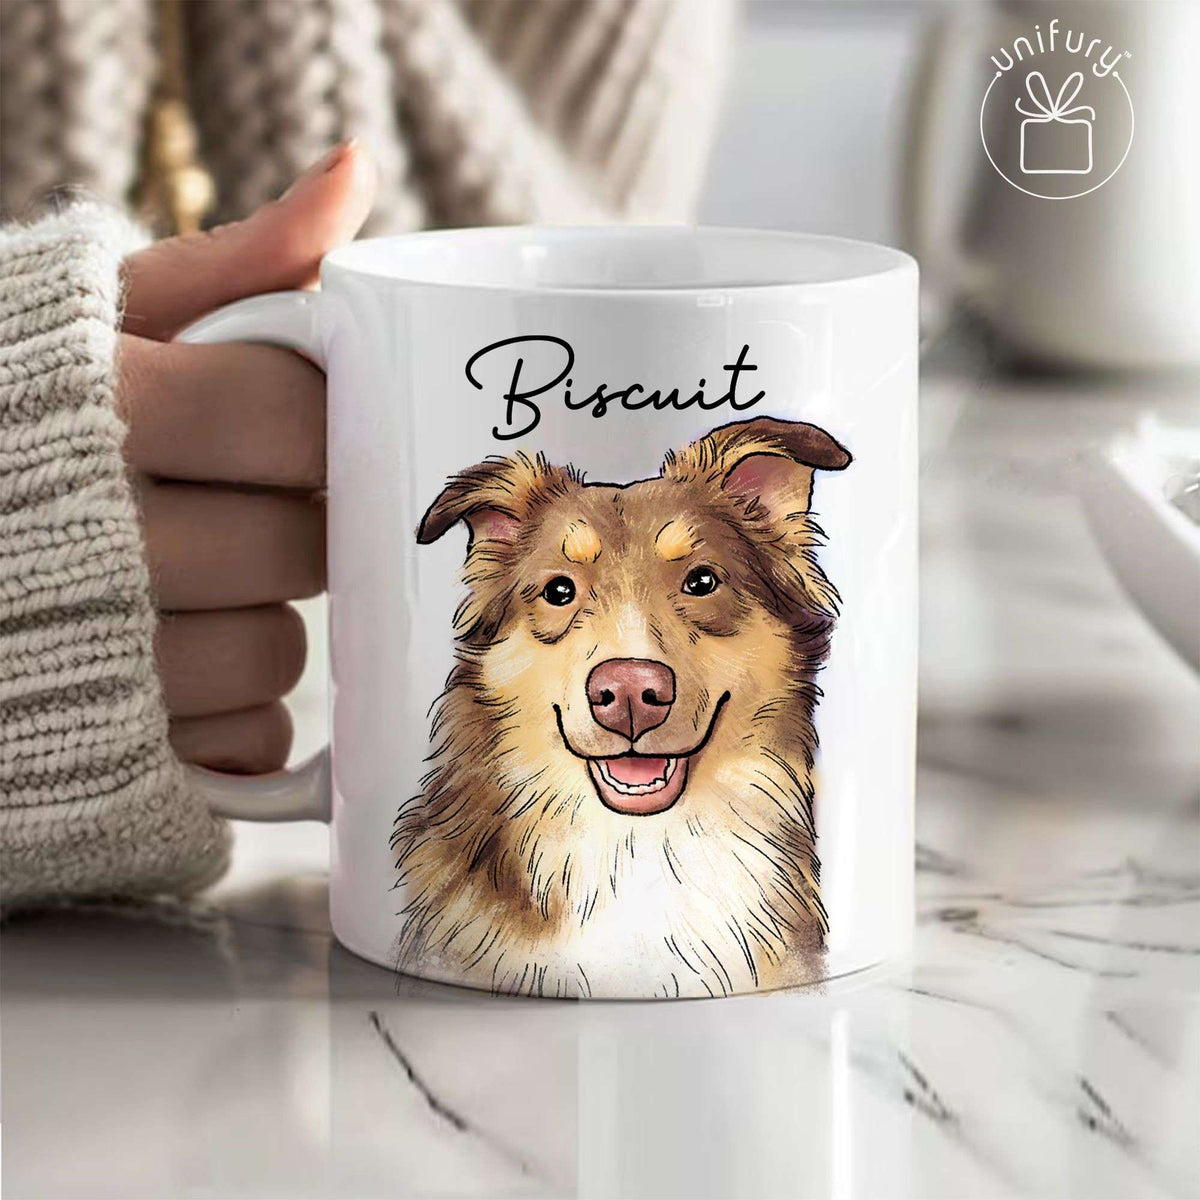 You Would Have Lived Forever Pet Memorial Edge-to-Edge Mug